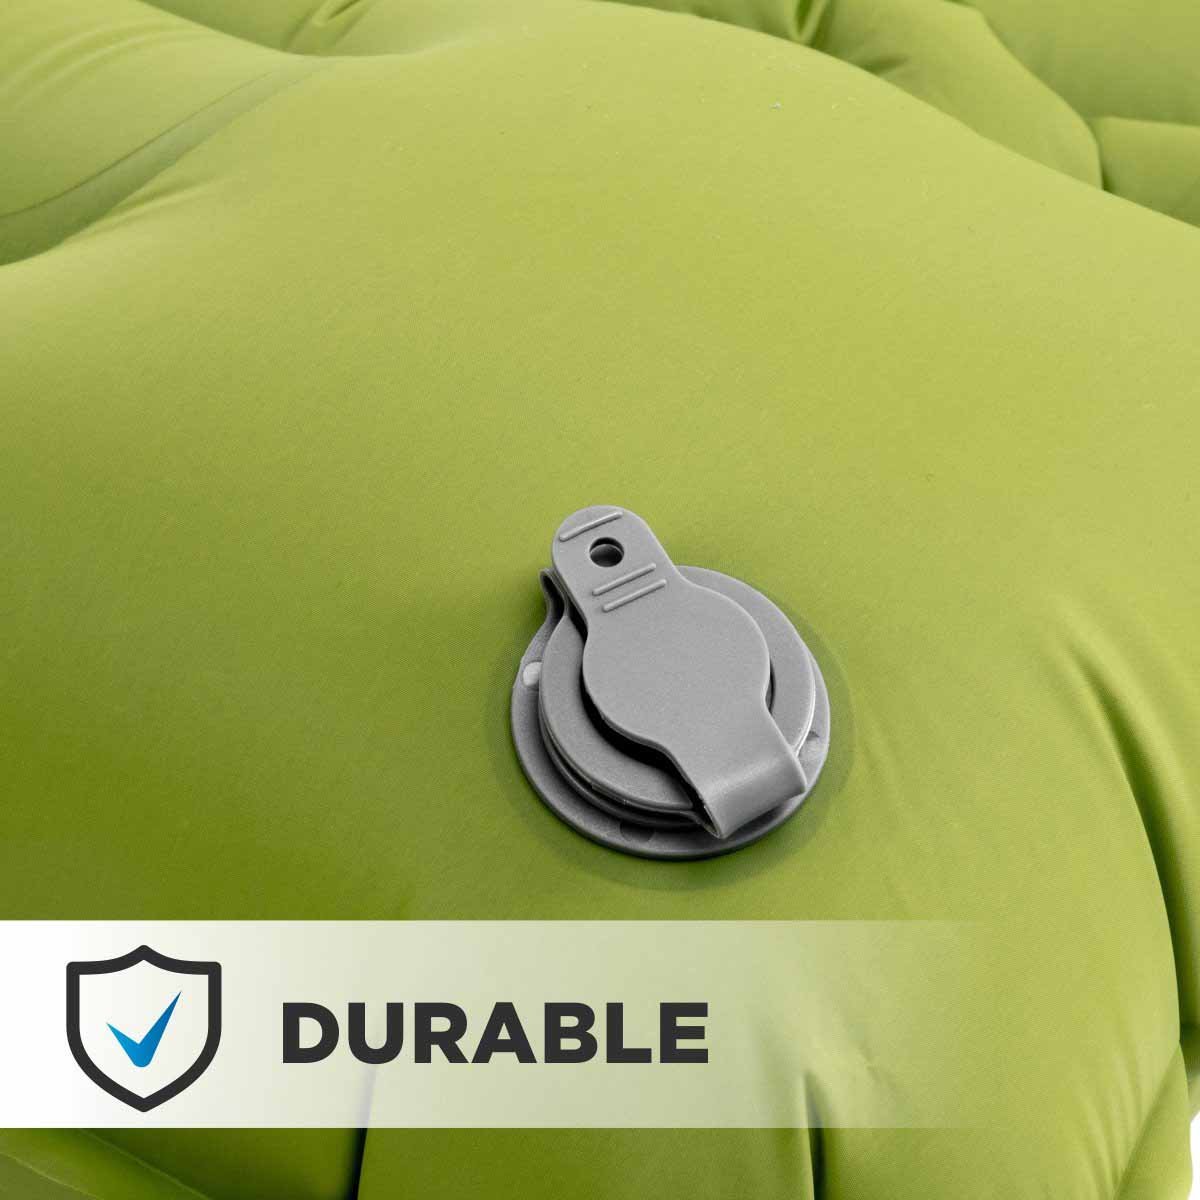 The valve of the 2-inch Camping Self Inflating Sleeping Pad is durable